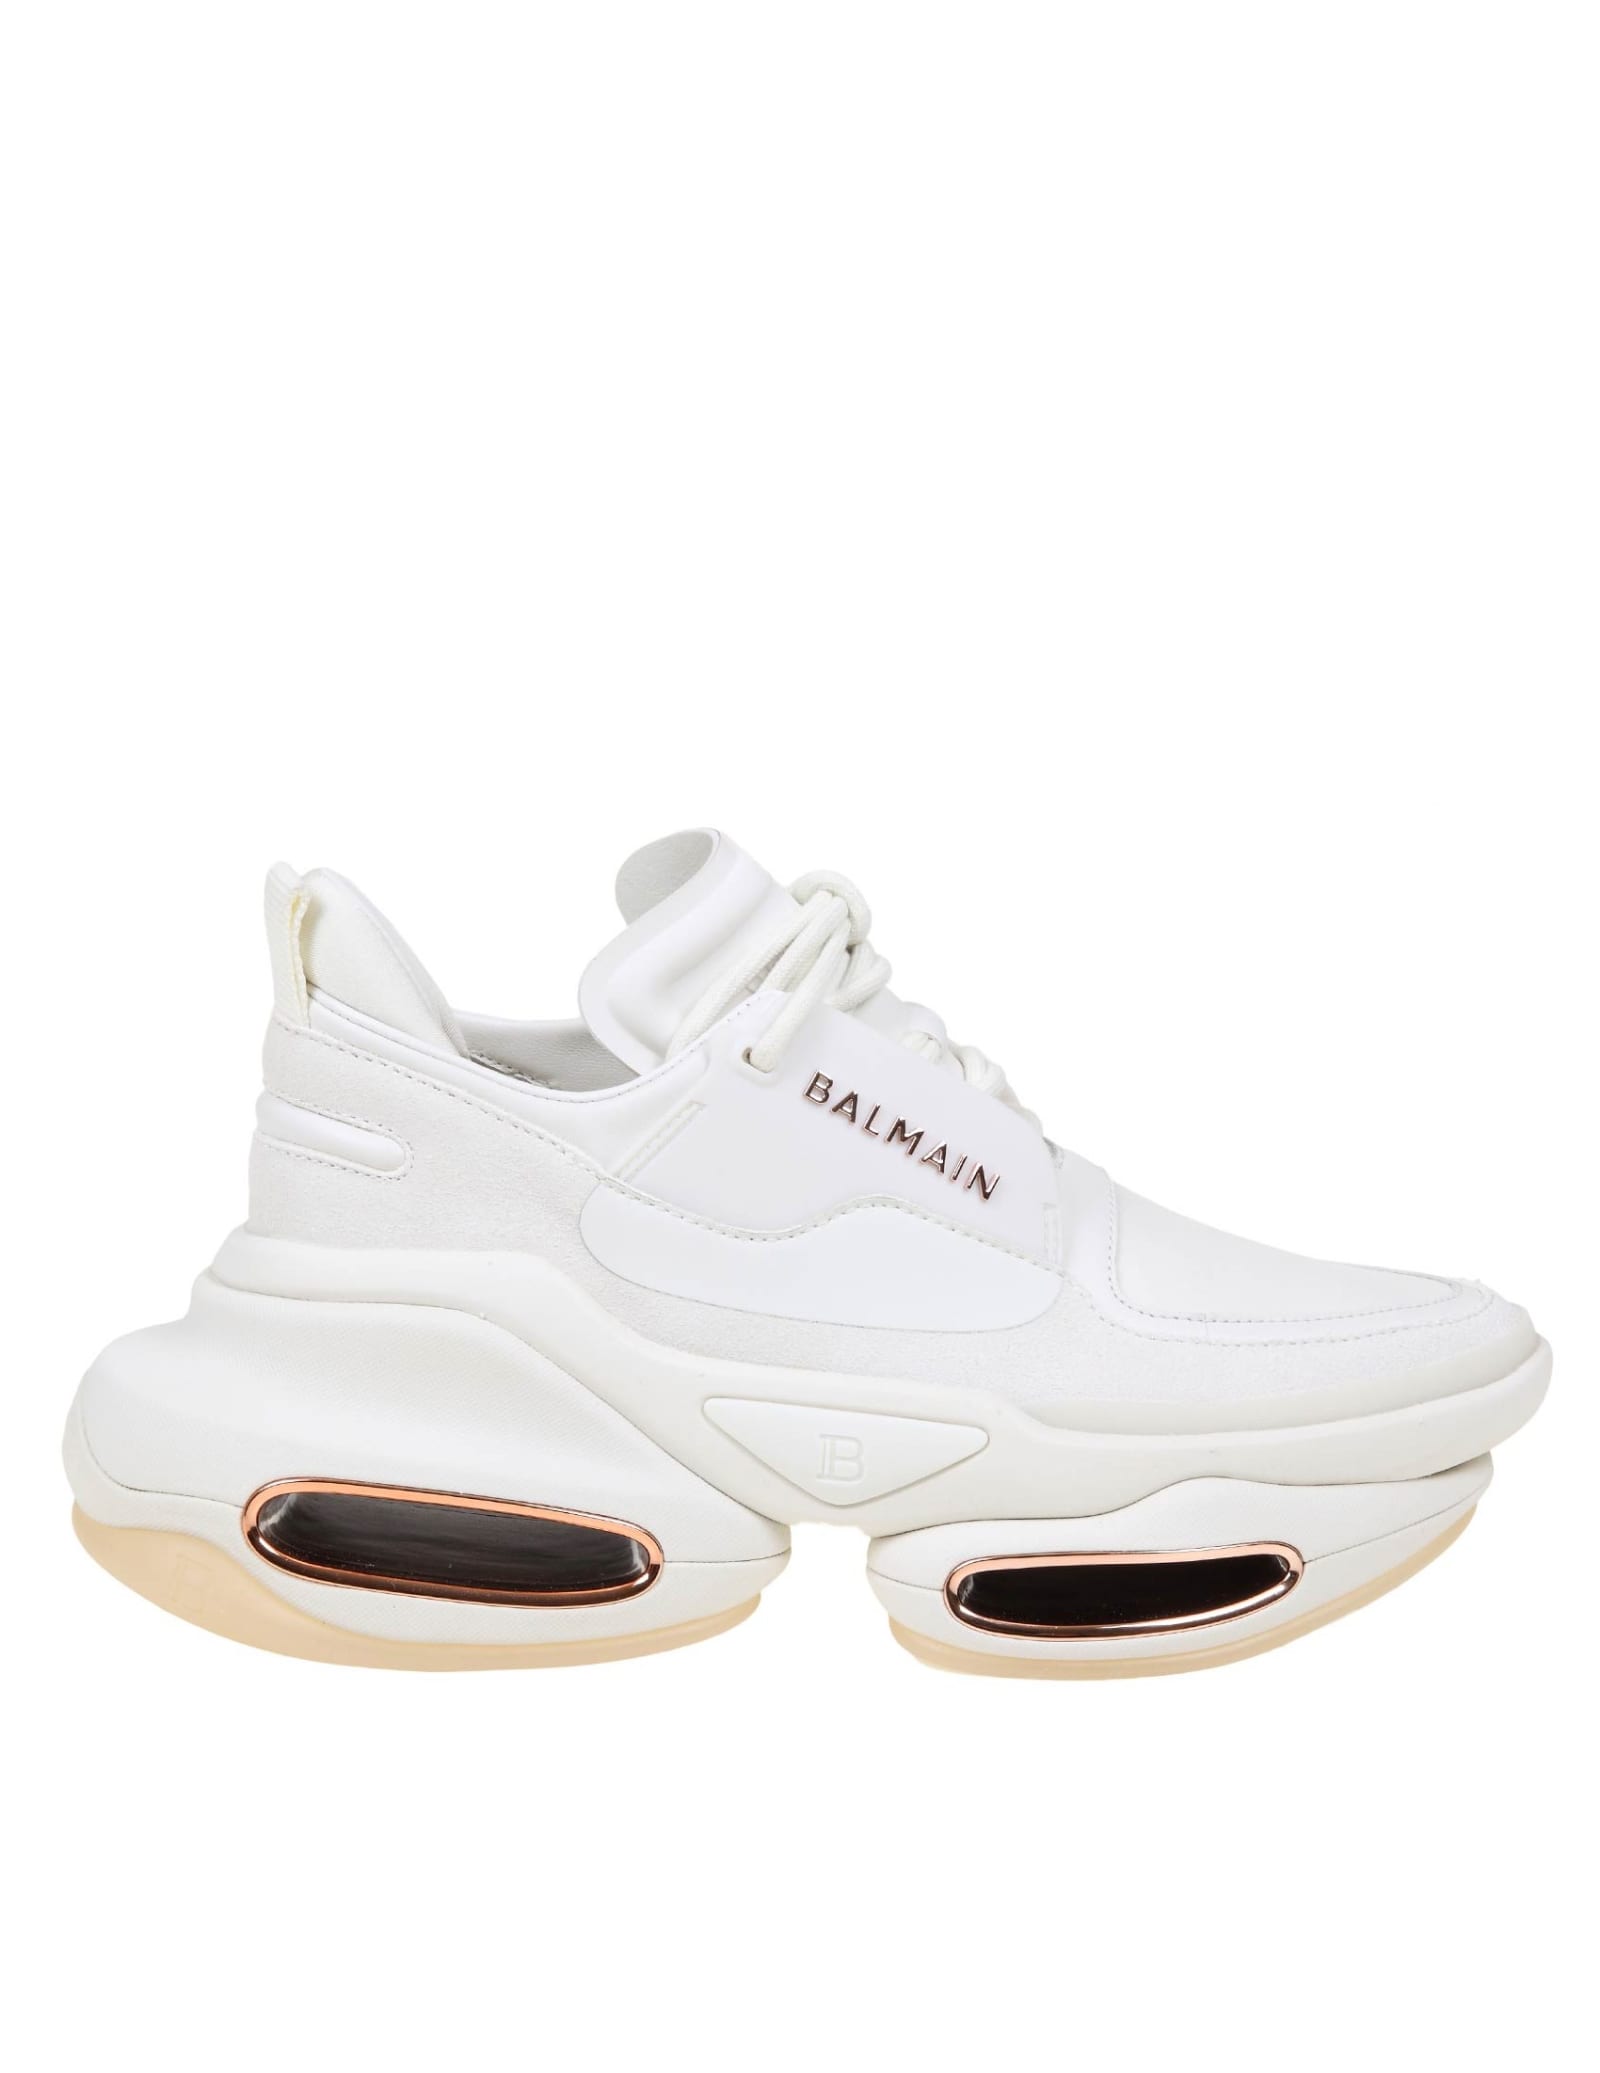 Buy Balmain B-bold Sneakers In Leather And Suede Color White online, shop Balmain shoes with free shipping